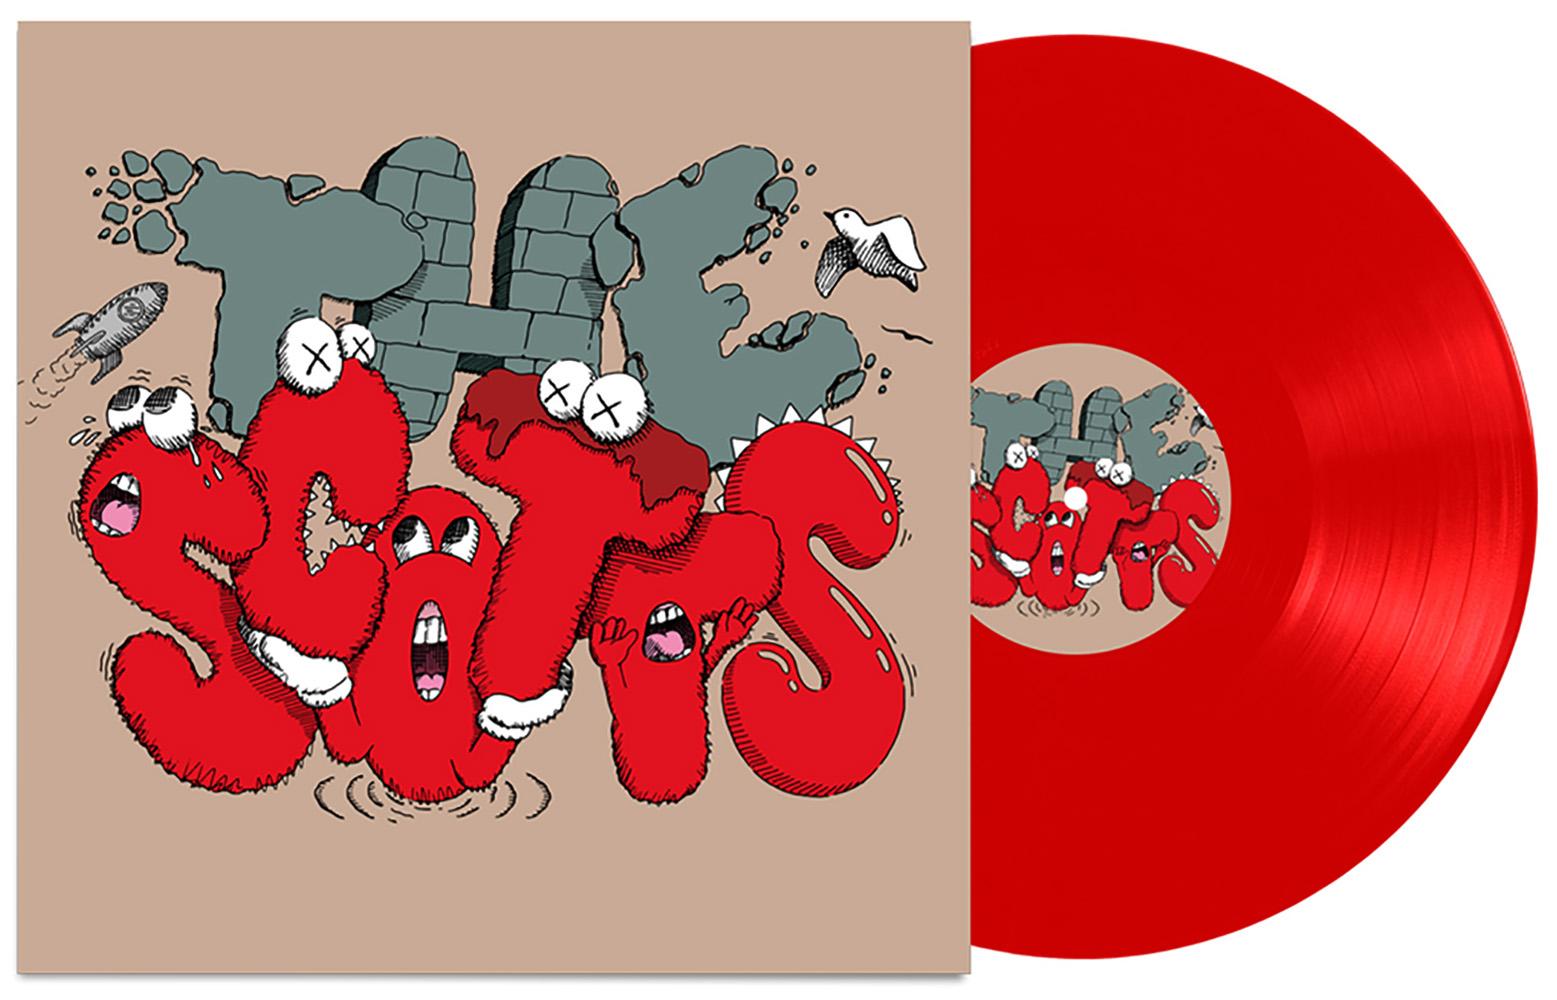 KAWS Travis Scott Record Art, “The Scotts”:

Offset lithograph on vinyl record jacket & record labels. 2020.

Dimensions: 12 x 12 inches.

Condition: New/unopened in original shrink wrapping. Includes original record. 

Unsigned from a sold out